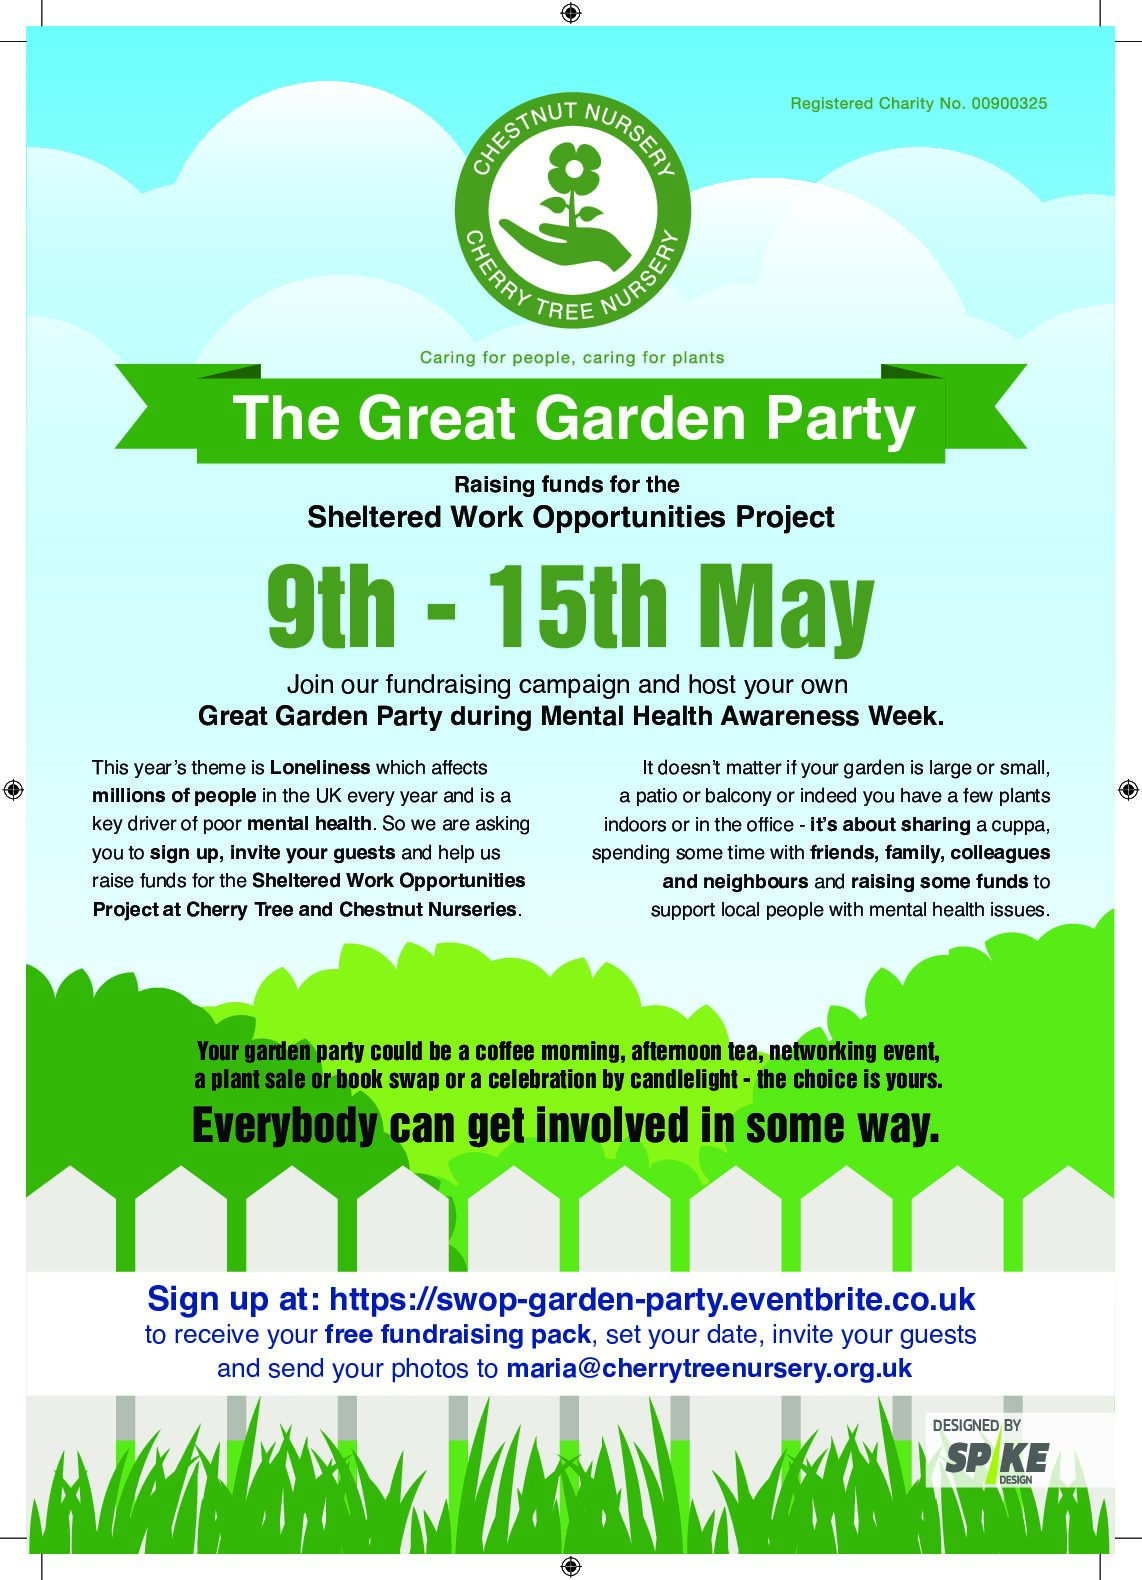 Join our fundraising campaign and host your own Great Garden Party during Mental Health Awareness Week.